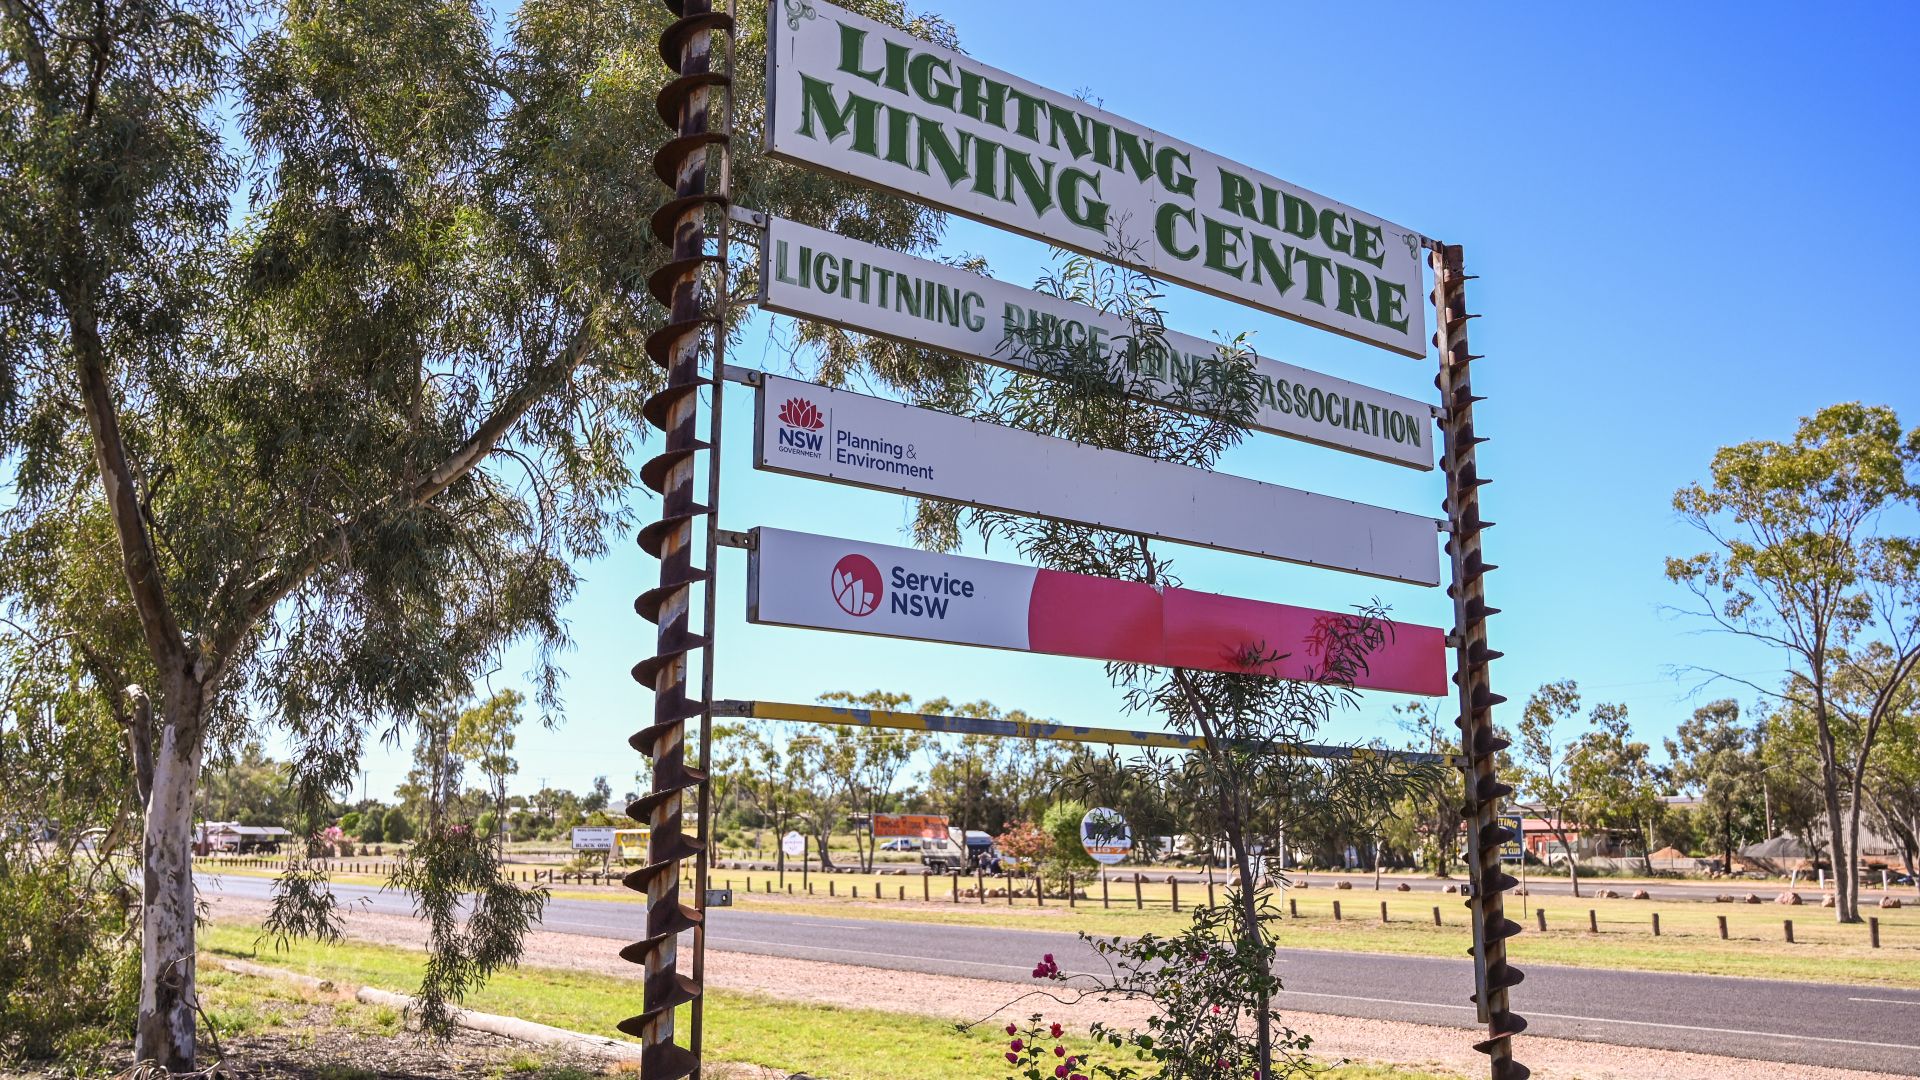 A photo of the "Welcome to Lightning Ridge" road sign.